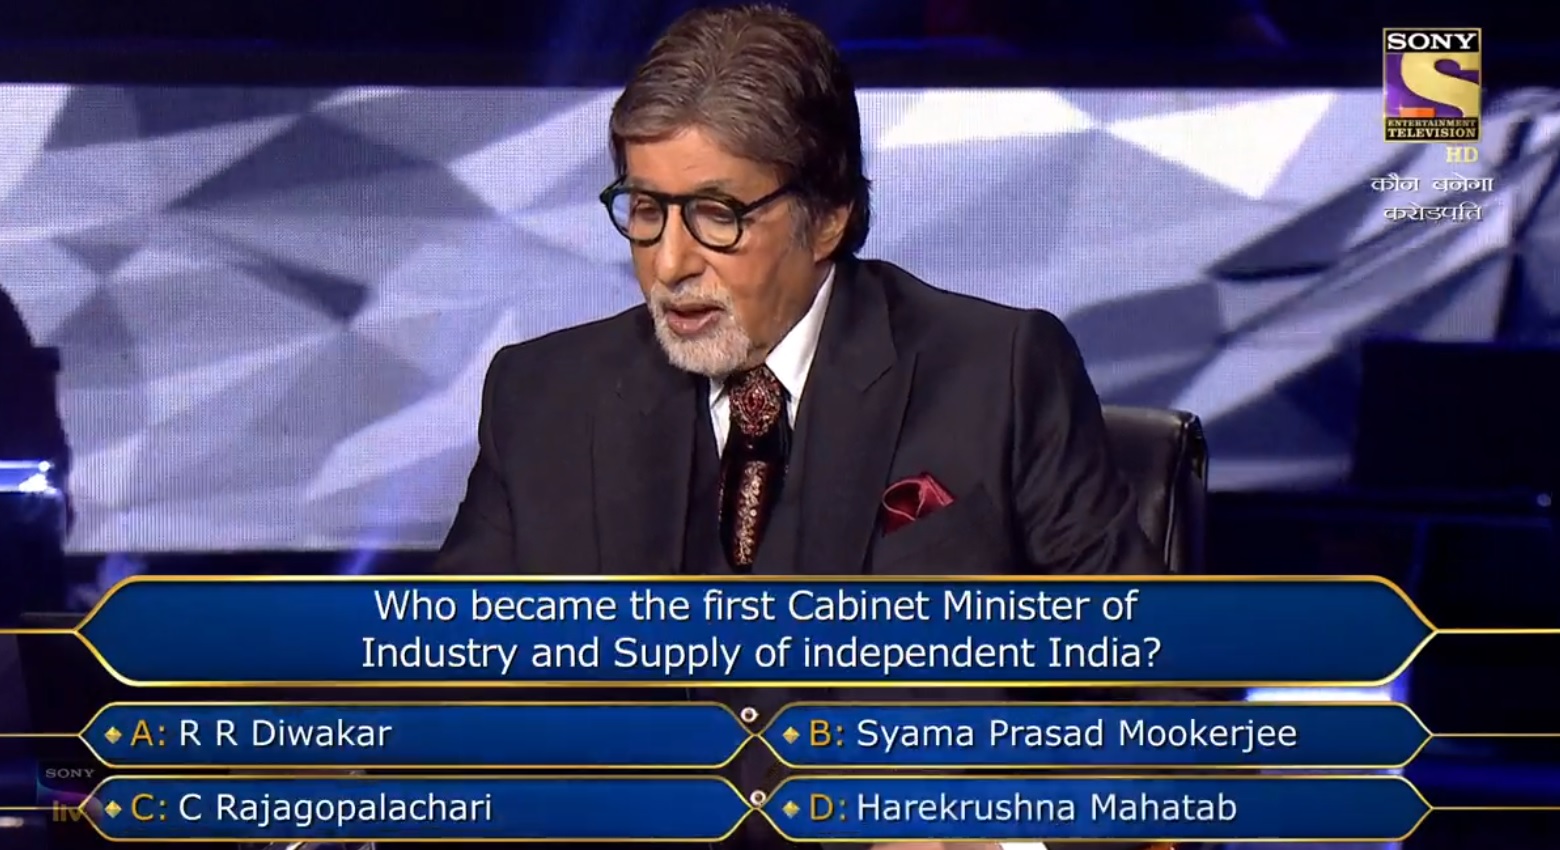 Ques : Who became the first Cabinet Minister of Industry and Supply of independent India?